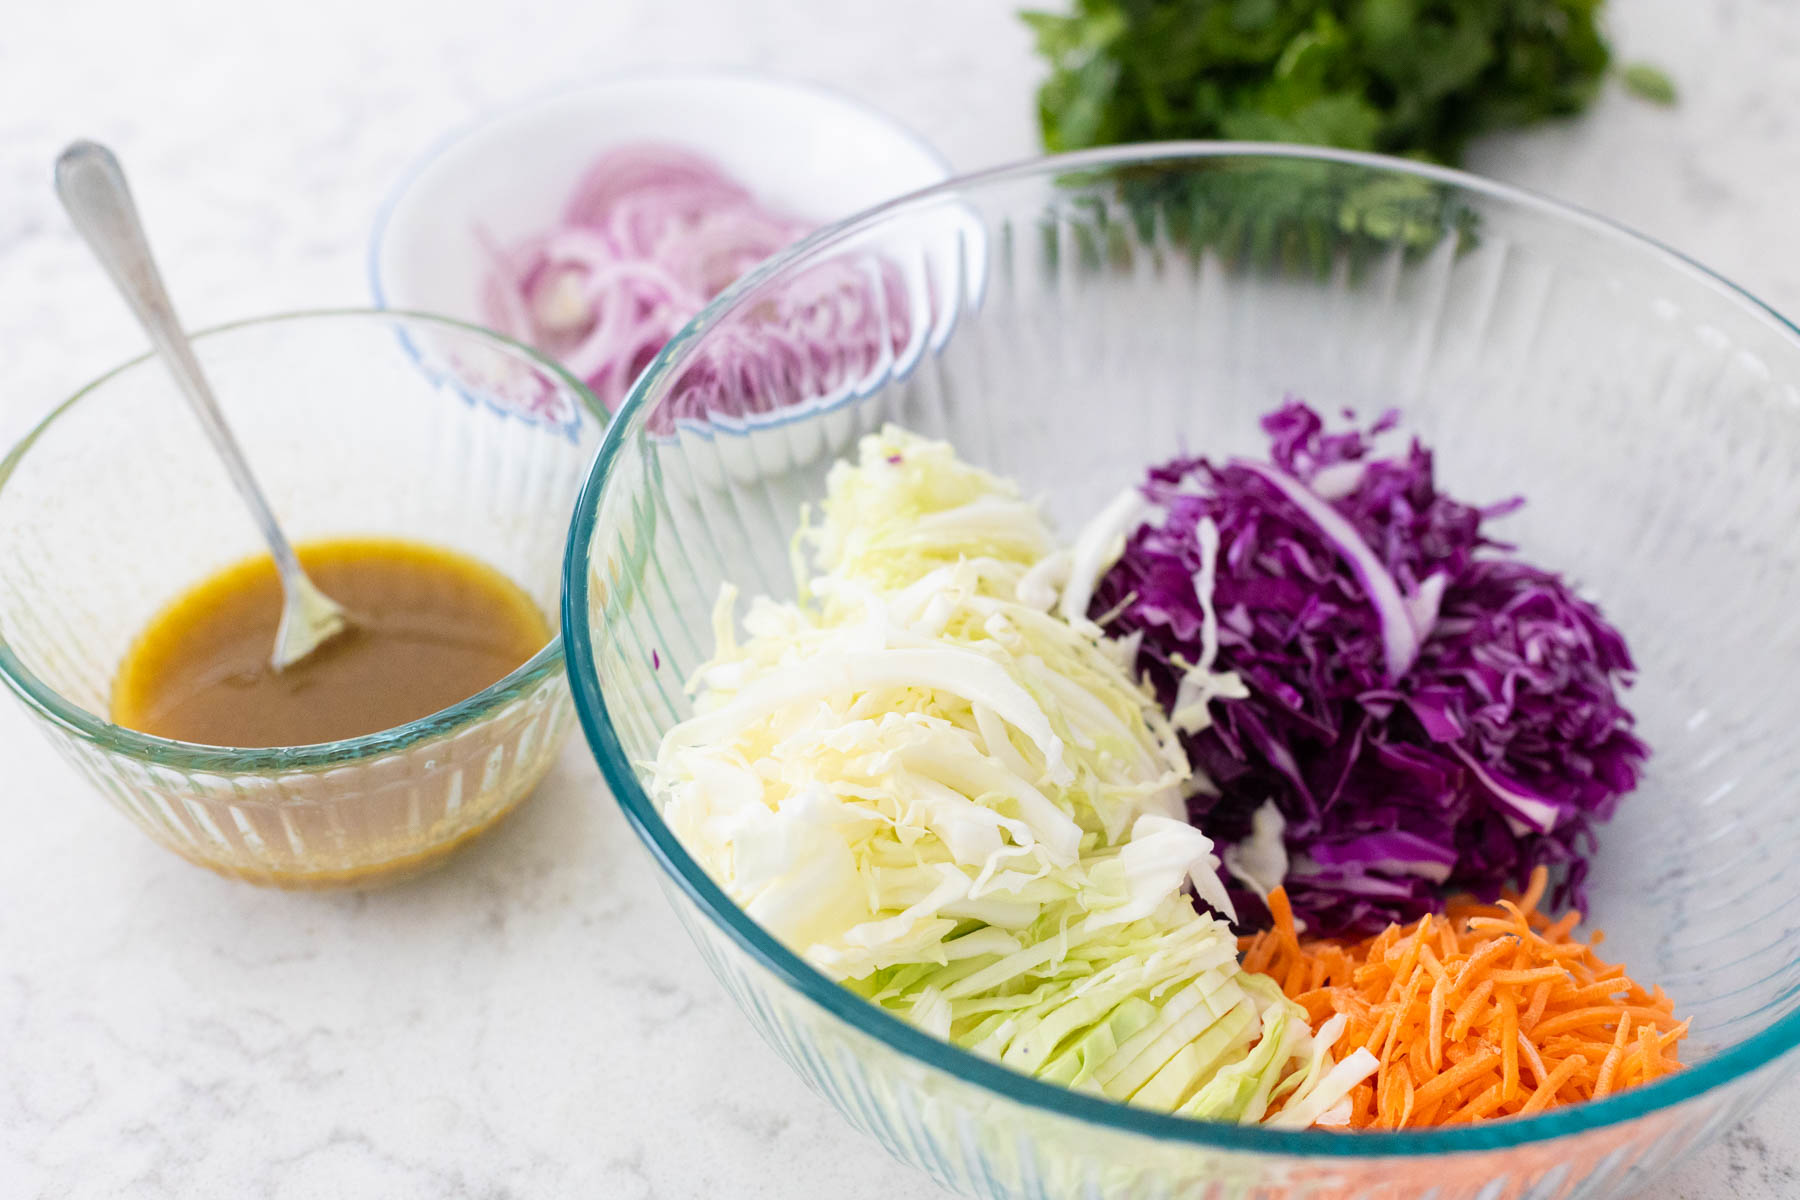 The coleslaw mix is in the bowl next to the bowl of dressing.